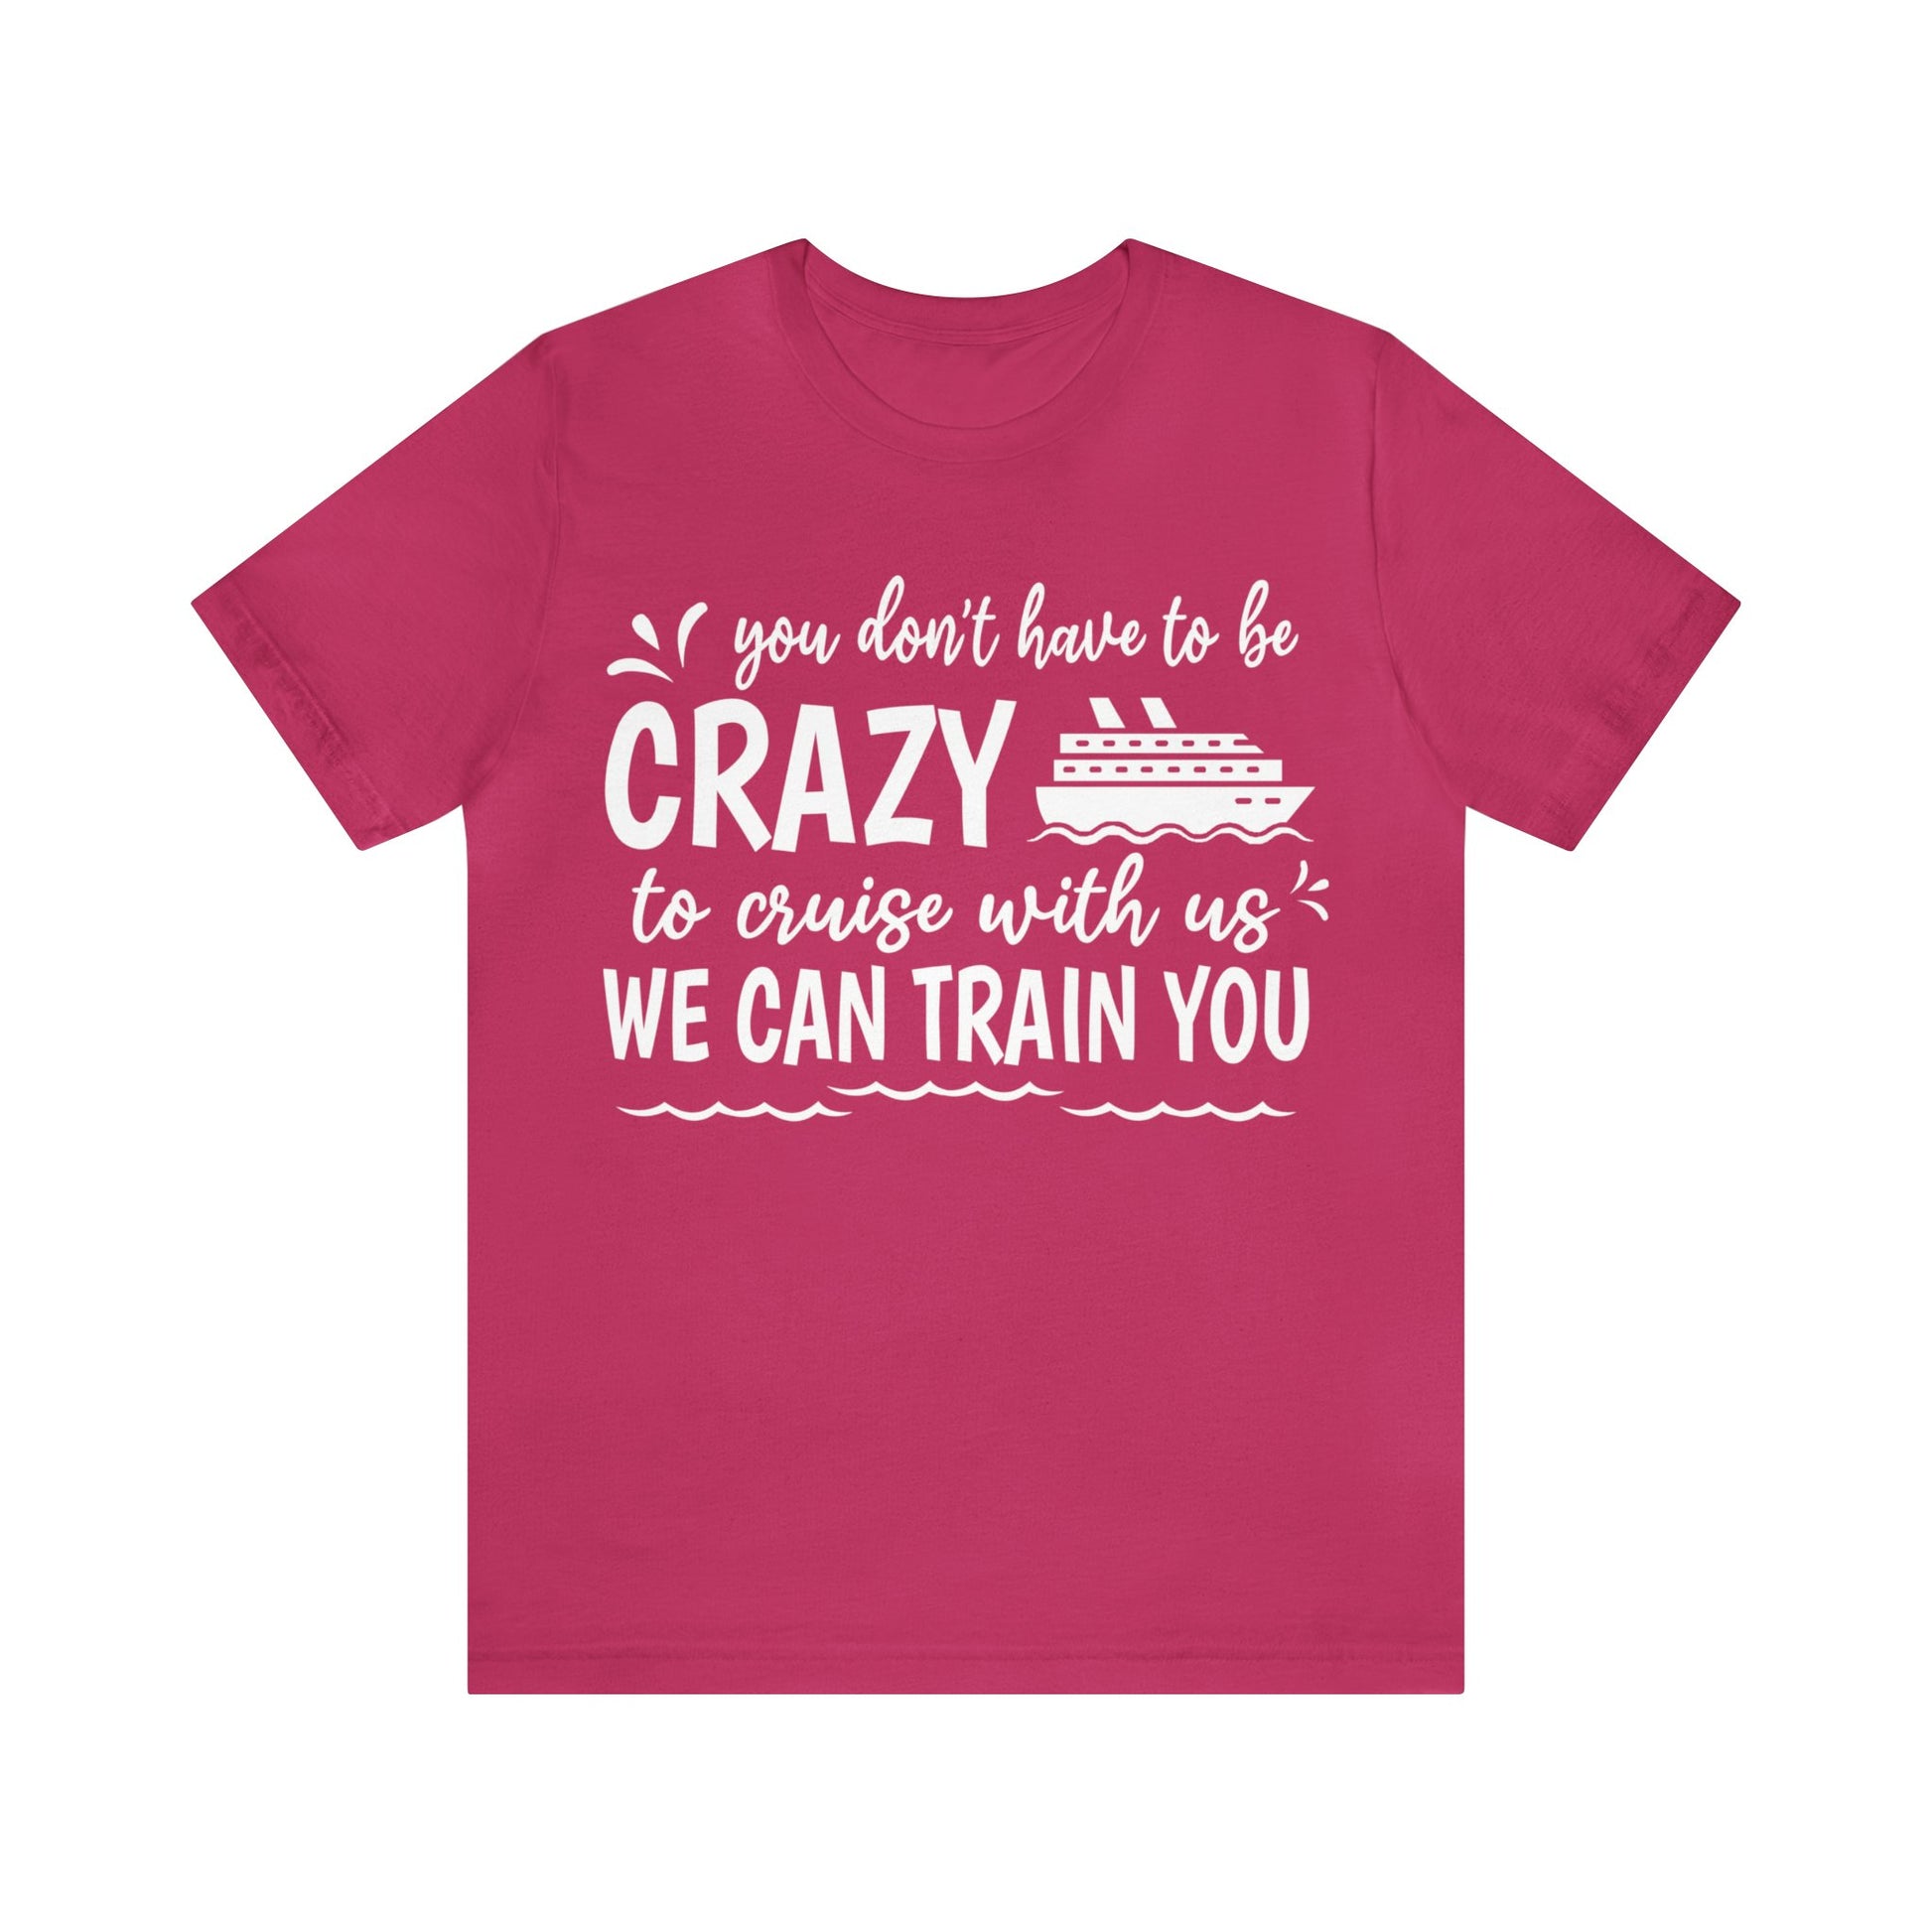 You don't have to be CRAZY to cruise with us We can train you Shirt in Berry